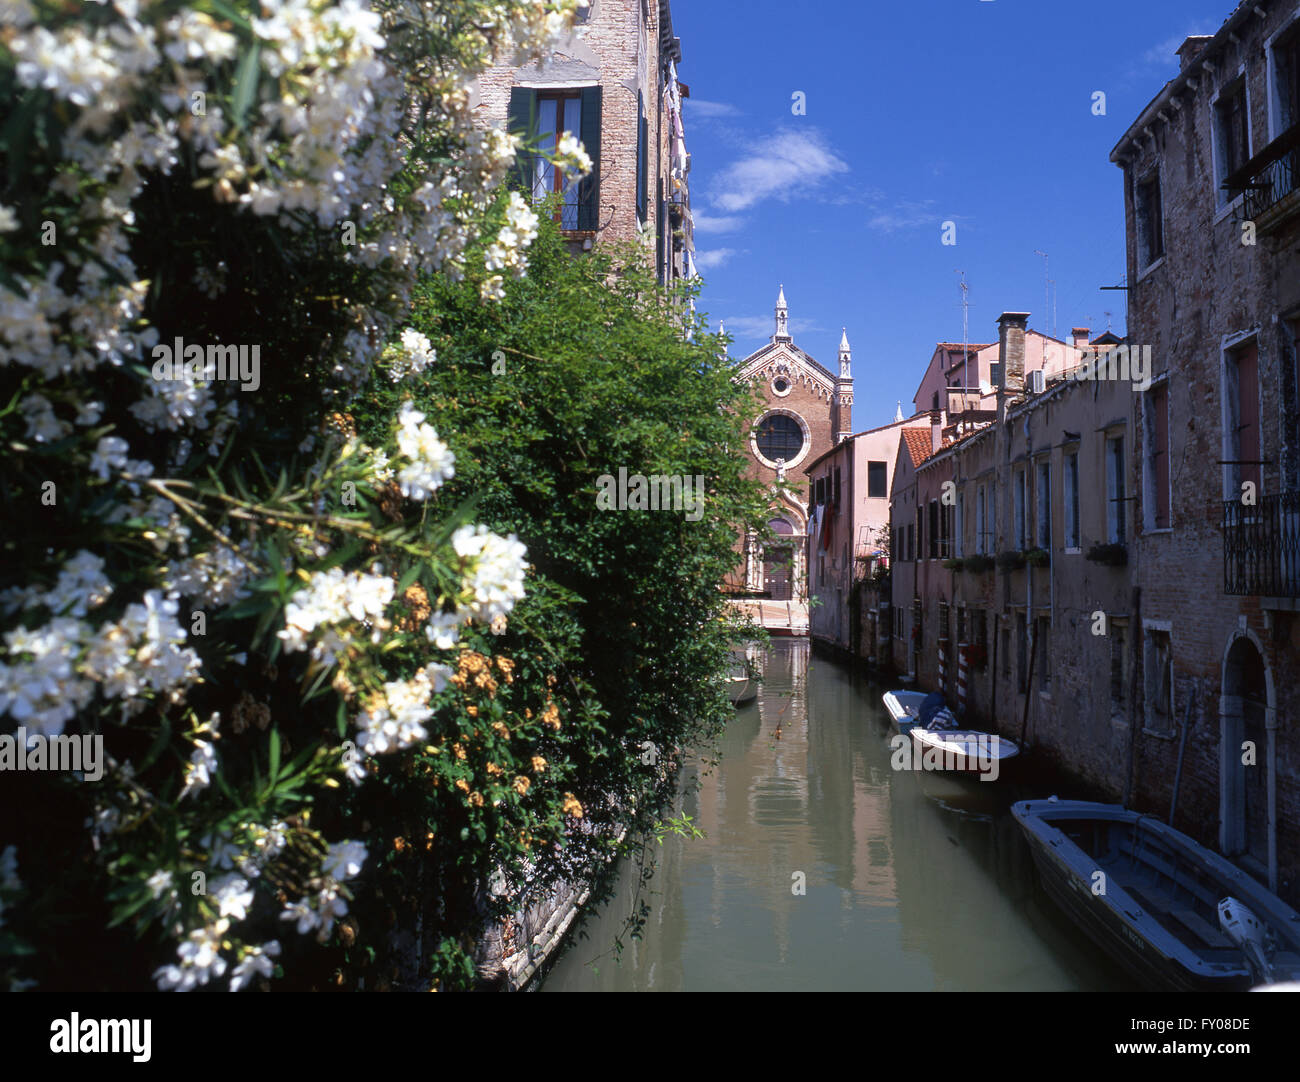 Madonna dell'Orto church reflected in canal with flowers in foreground Cannaregio sestier Venice Veneto Italy Stock Photo